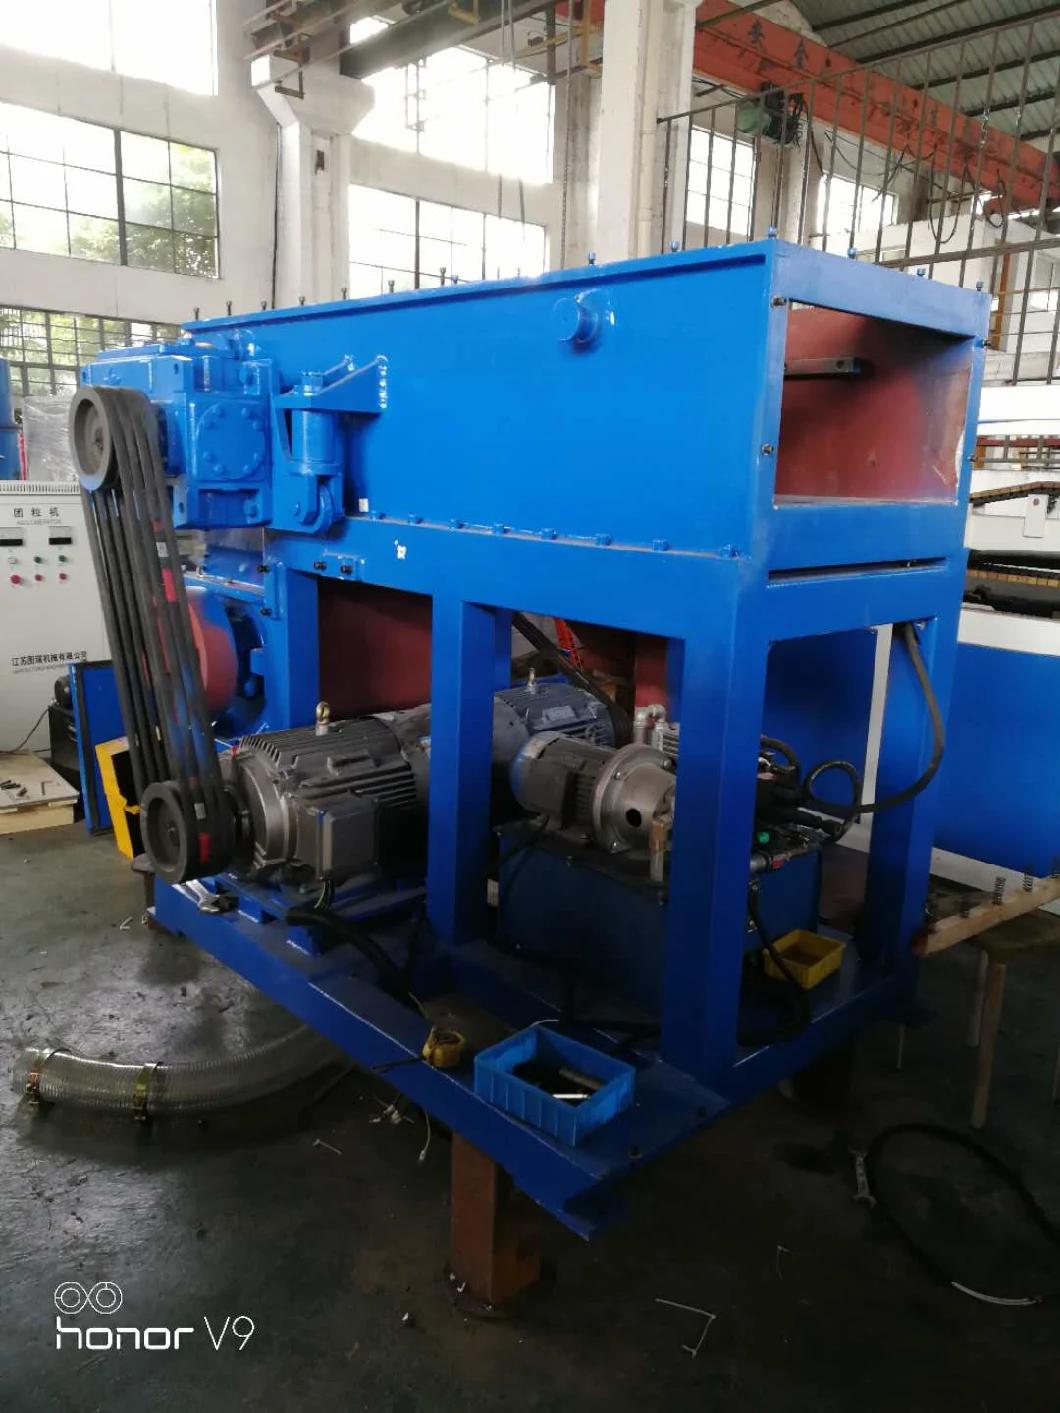 High Quality Shredder Machine for Recycling Plant with Great Materials